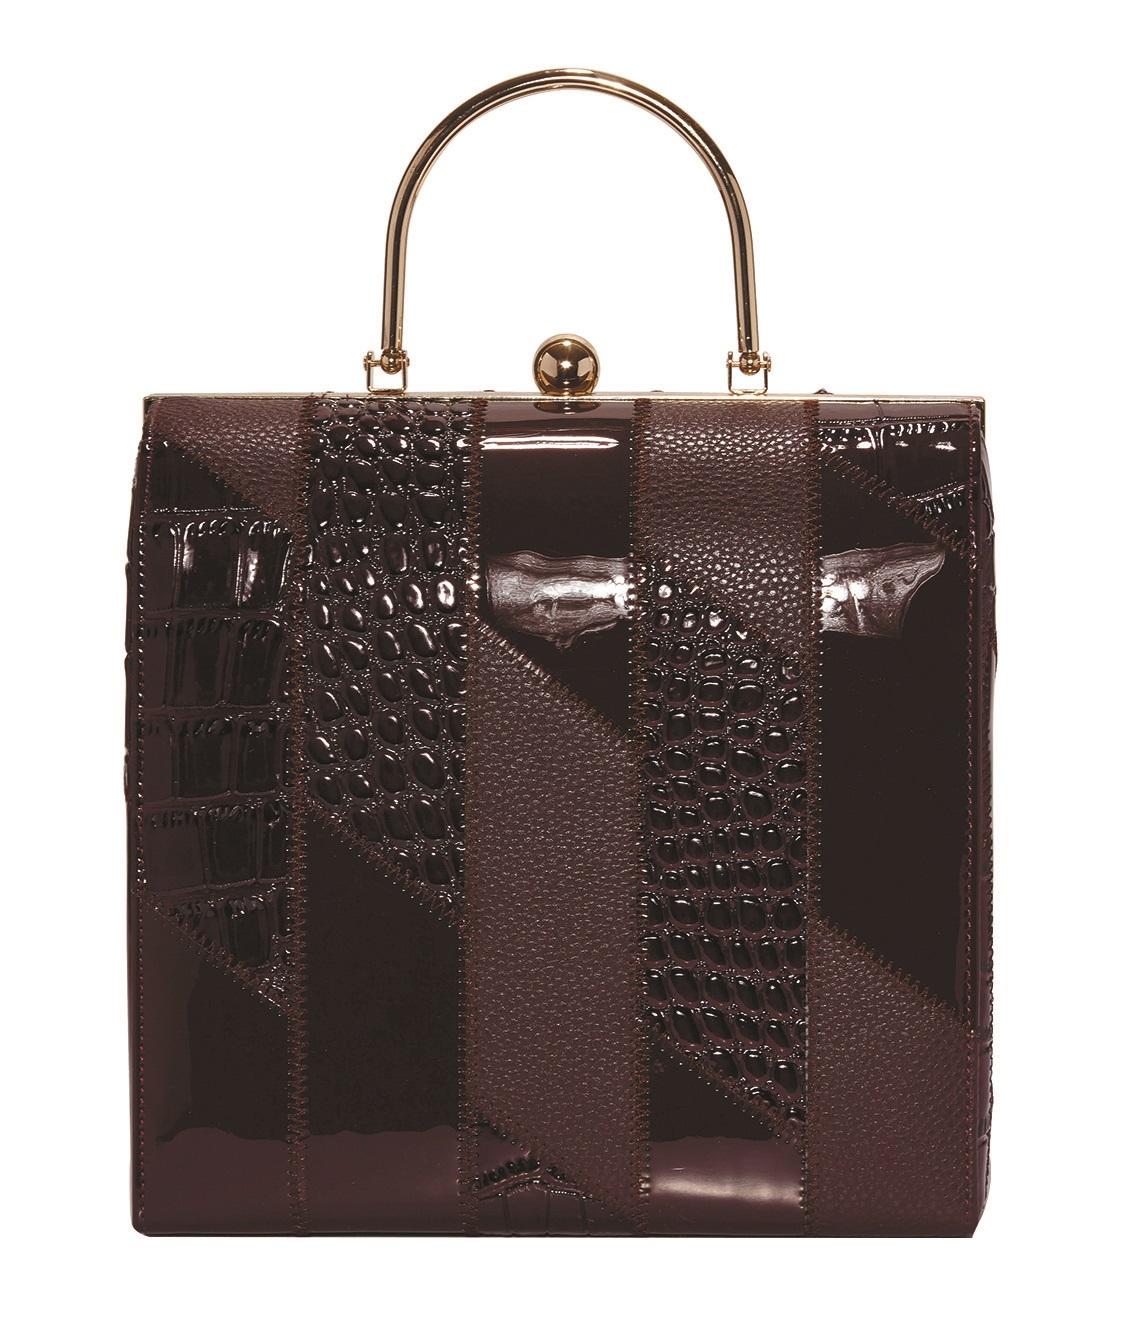 House of Fraser, Therapy London Maroon Patent Frame Bag, £45